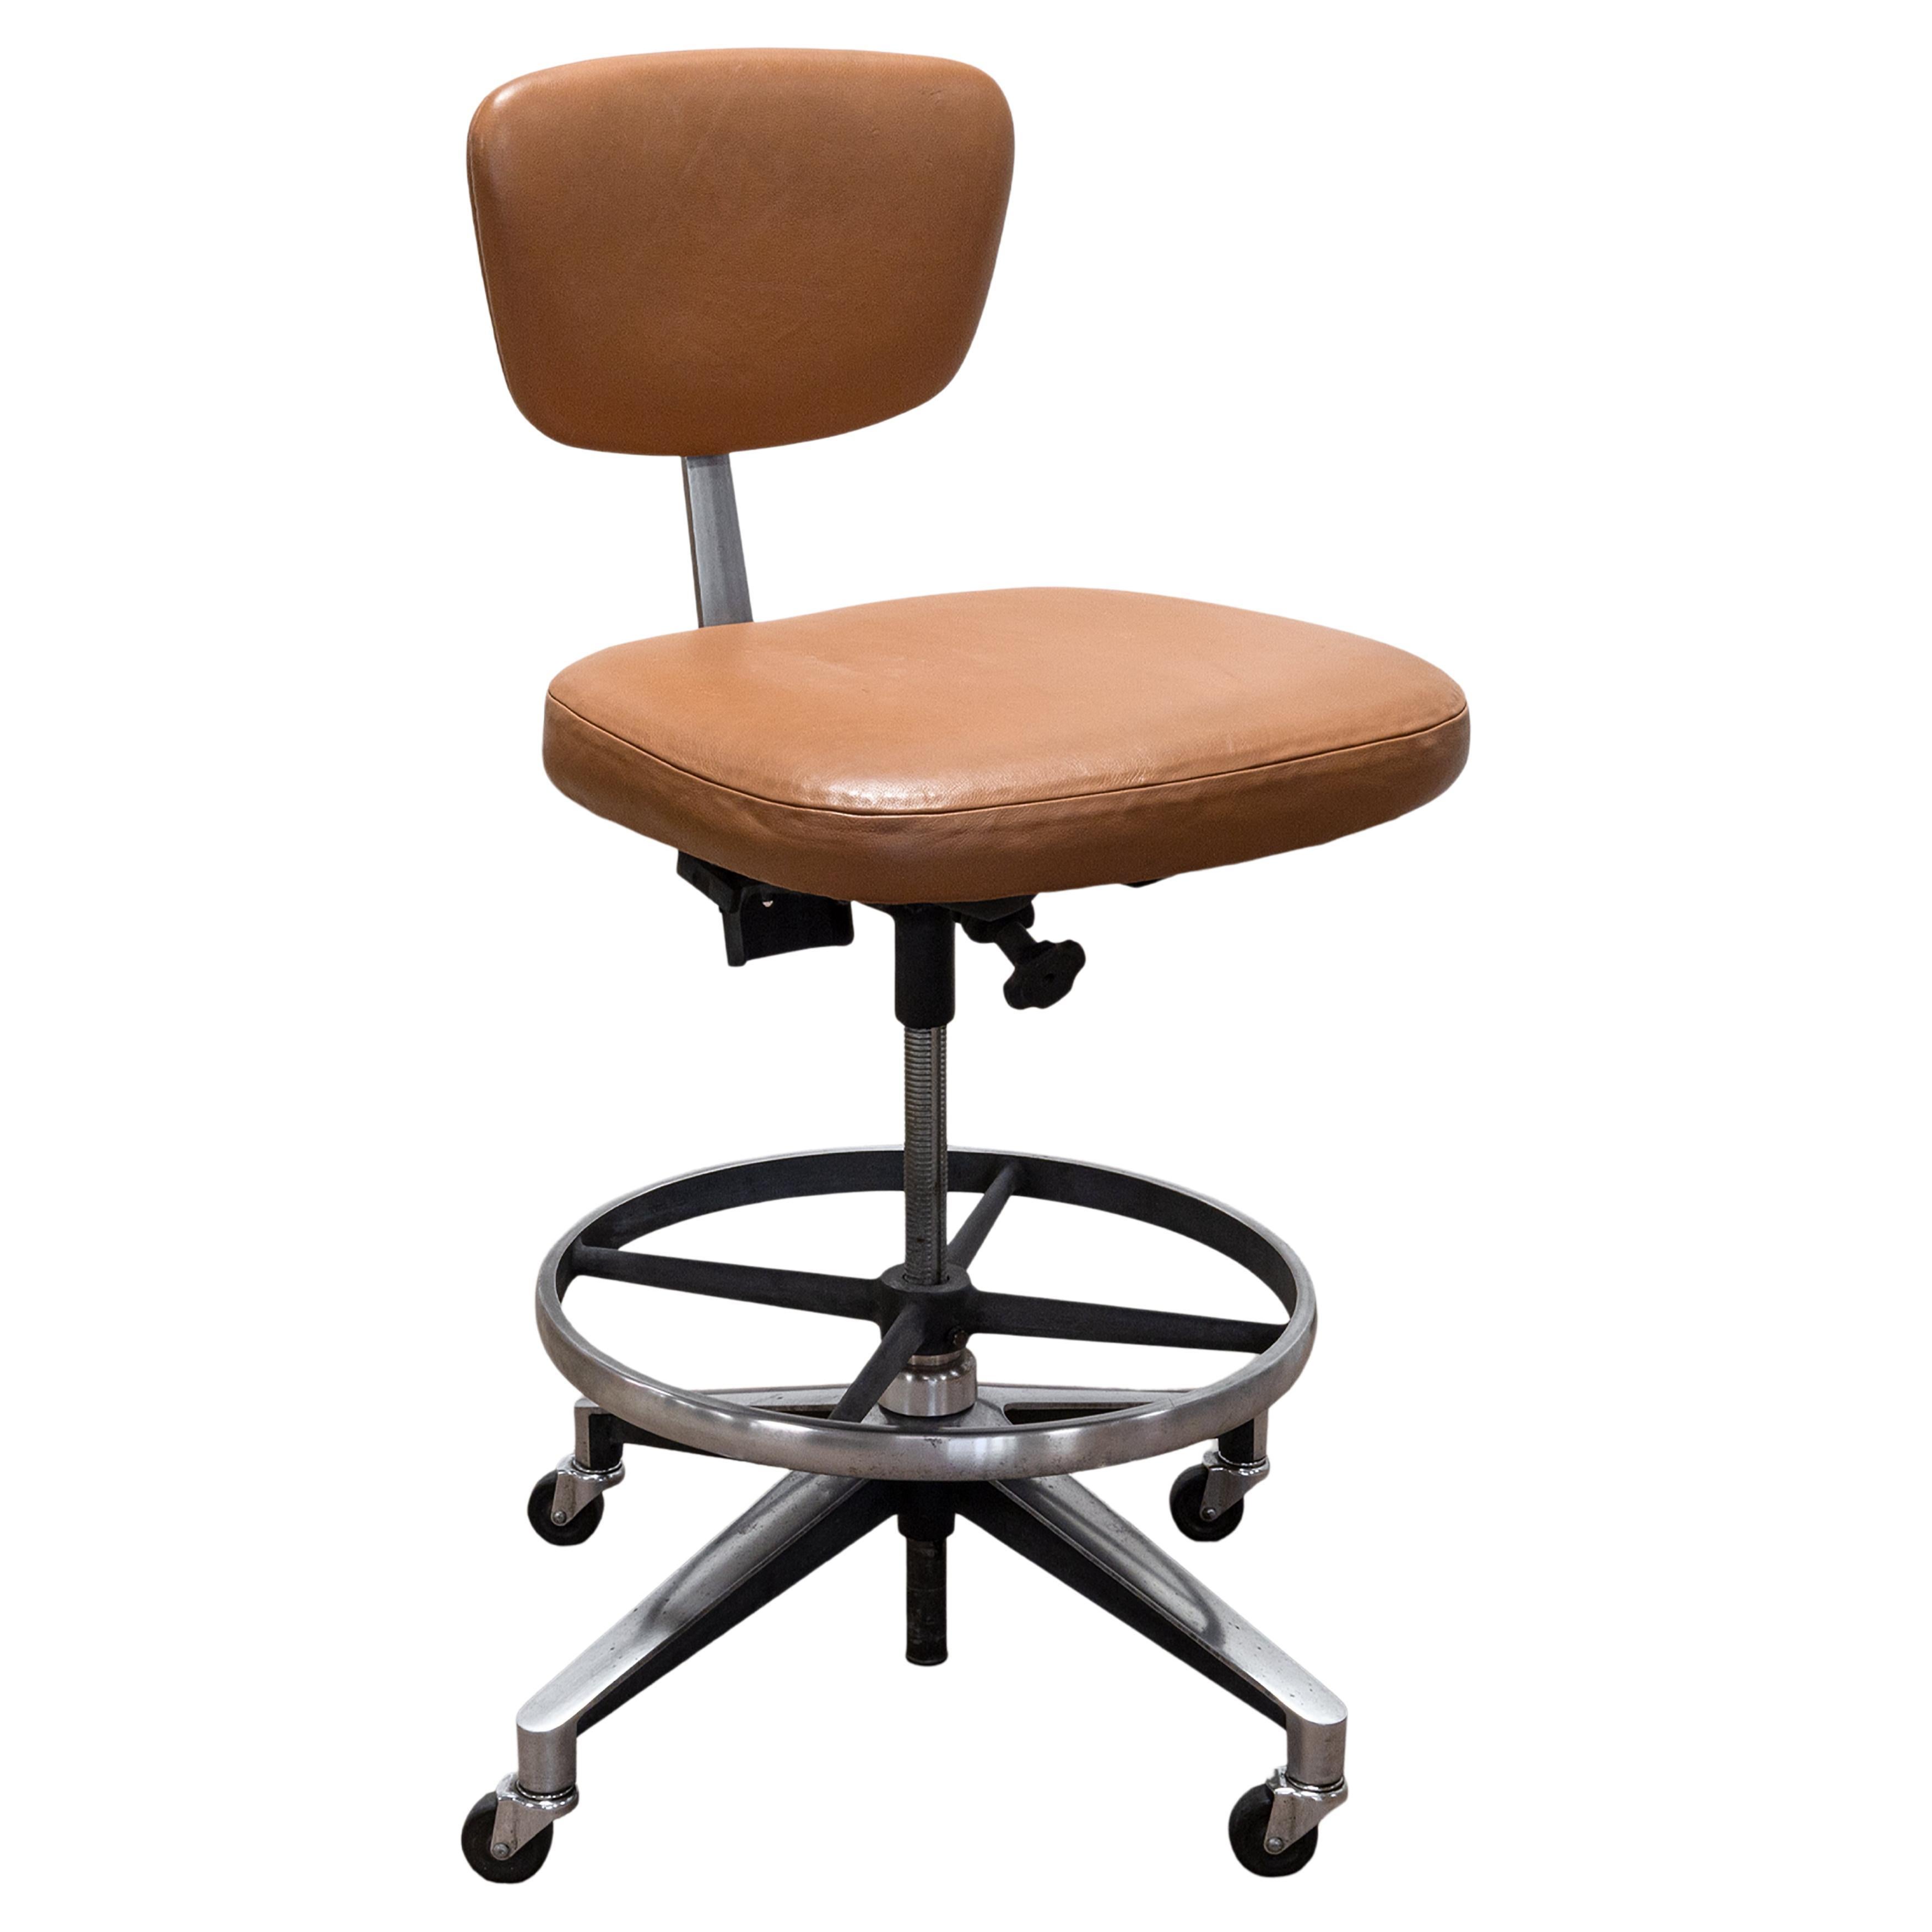 What is the best drafting chair?